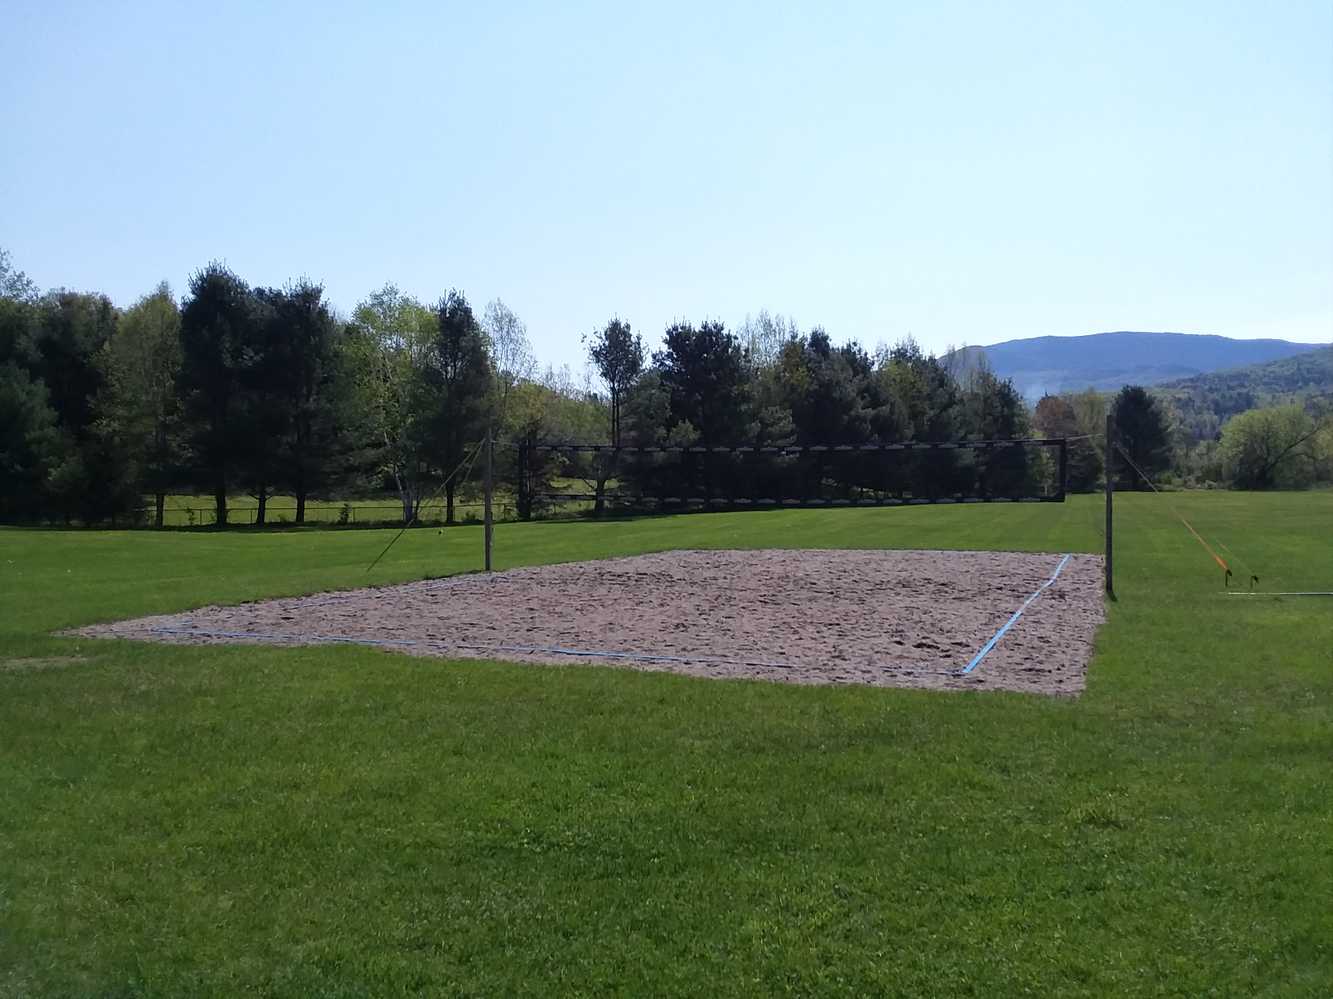 A volleyball court and recreational fields